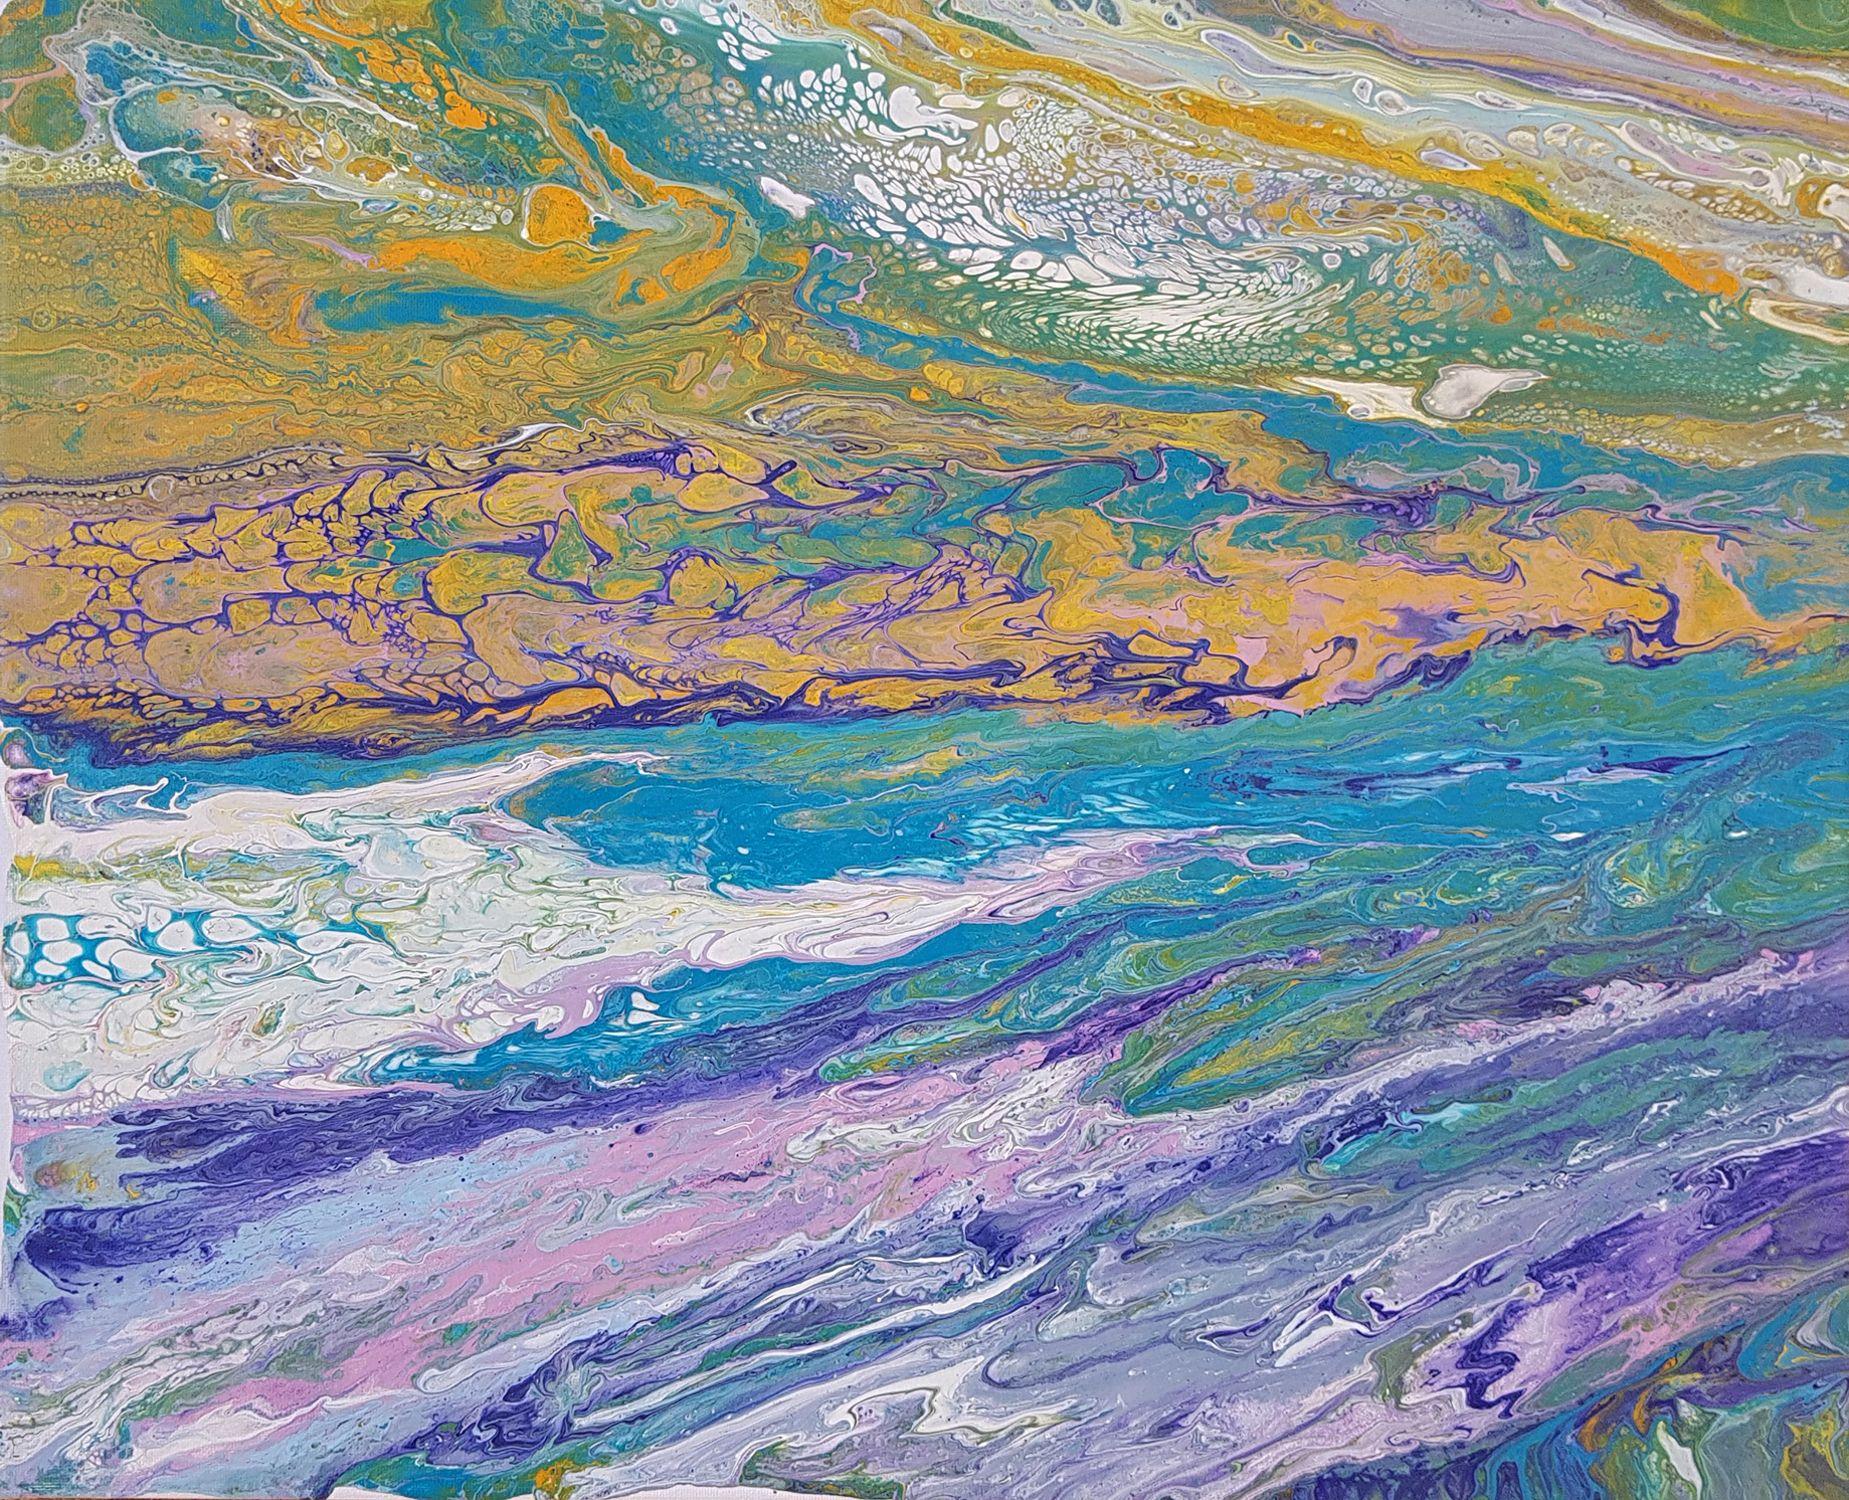 Chaotic Waves is a bold abstract with flowing movement and textures capturing the essence of expressive, crashing waves. Uniquely divided with a custom yellow hue; this asymmetrically balanced piece represents land elements and the sky above the